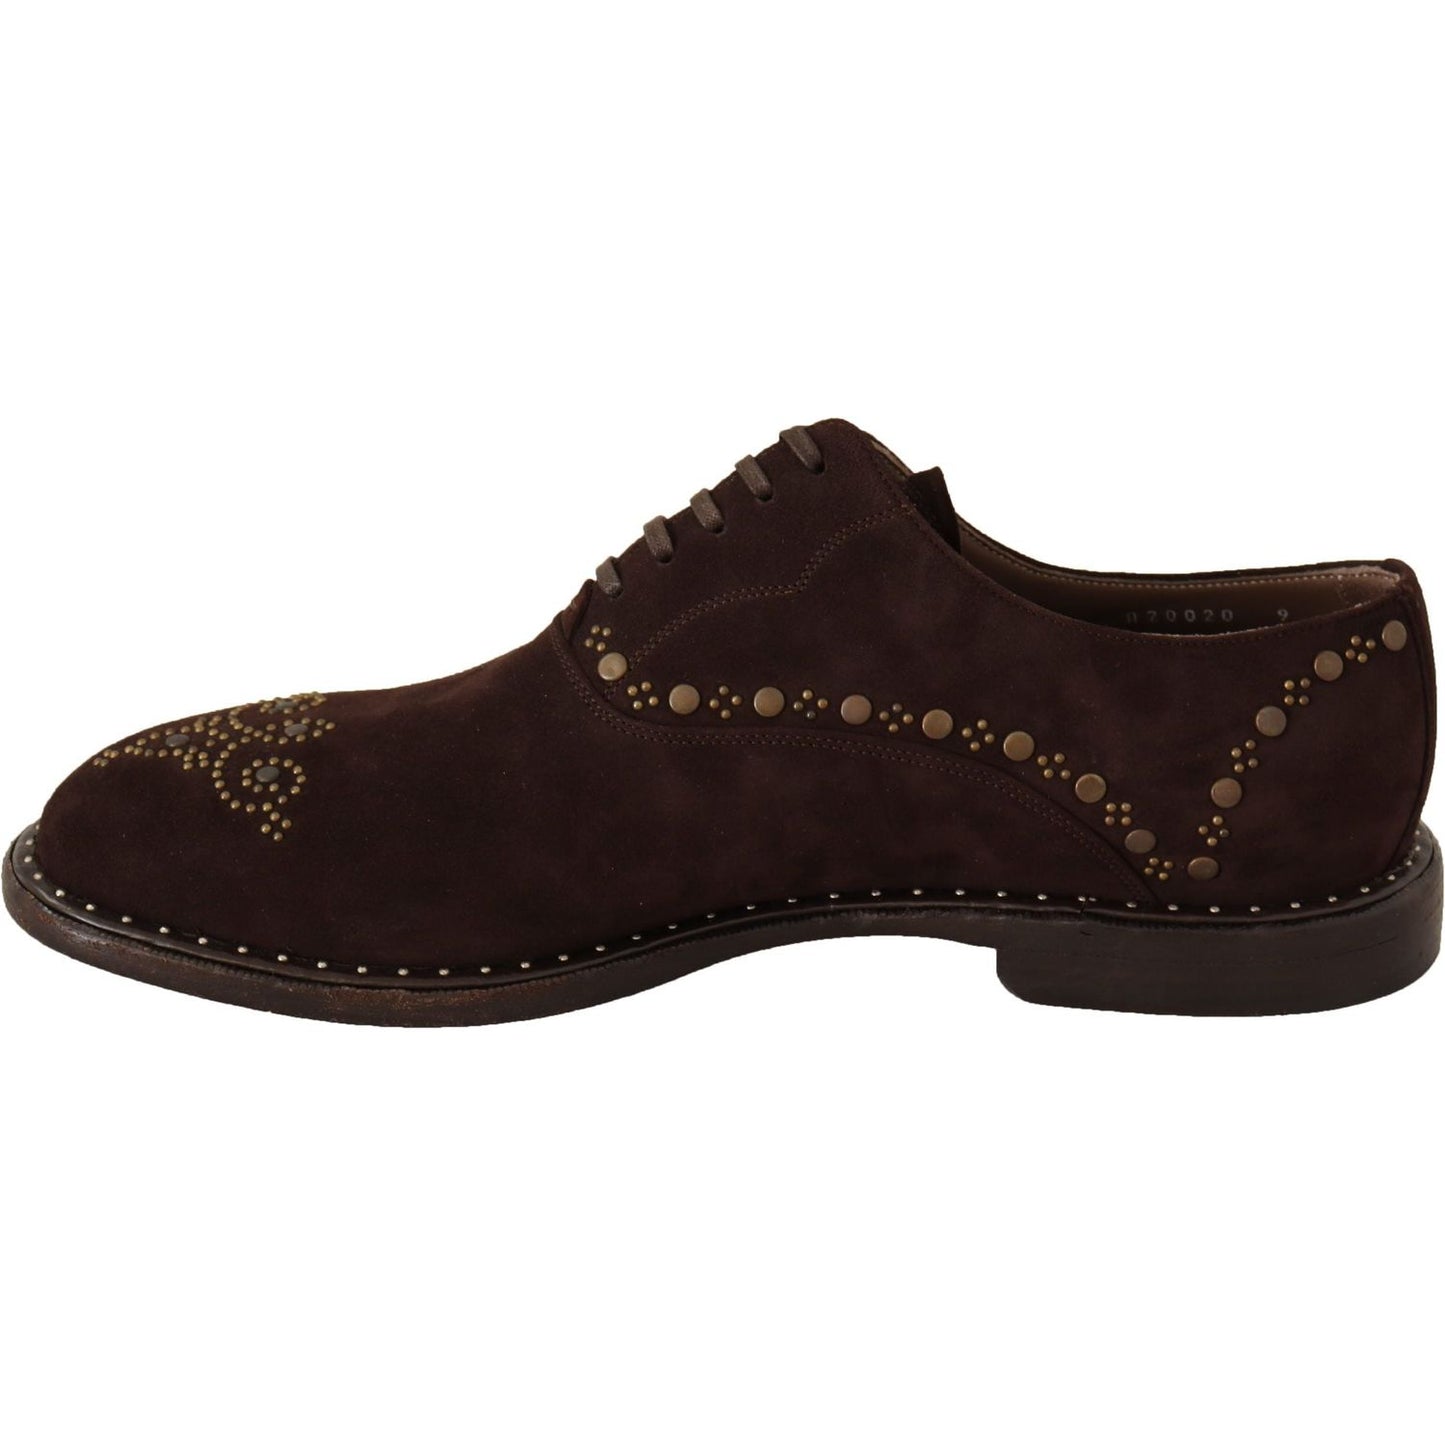 Dolce & Gabbana Elegant Brown Suede Studded Derby Shoes brown-suede-marsala-derby-studded-shoes Dress Shoes IMG_0015-scaled-1e2f81e1-eb3.jpg